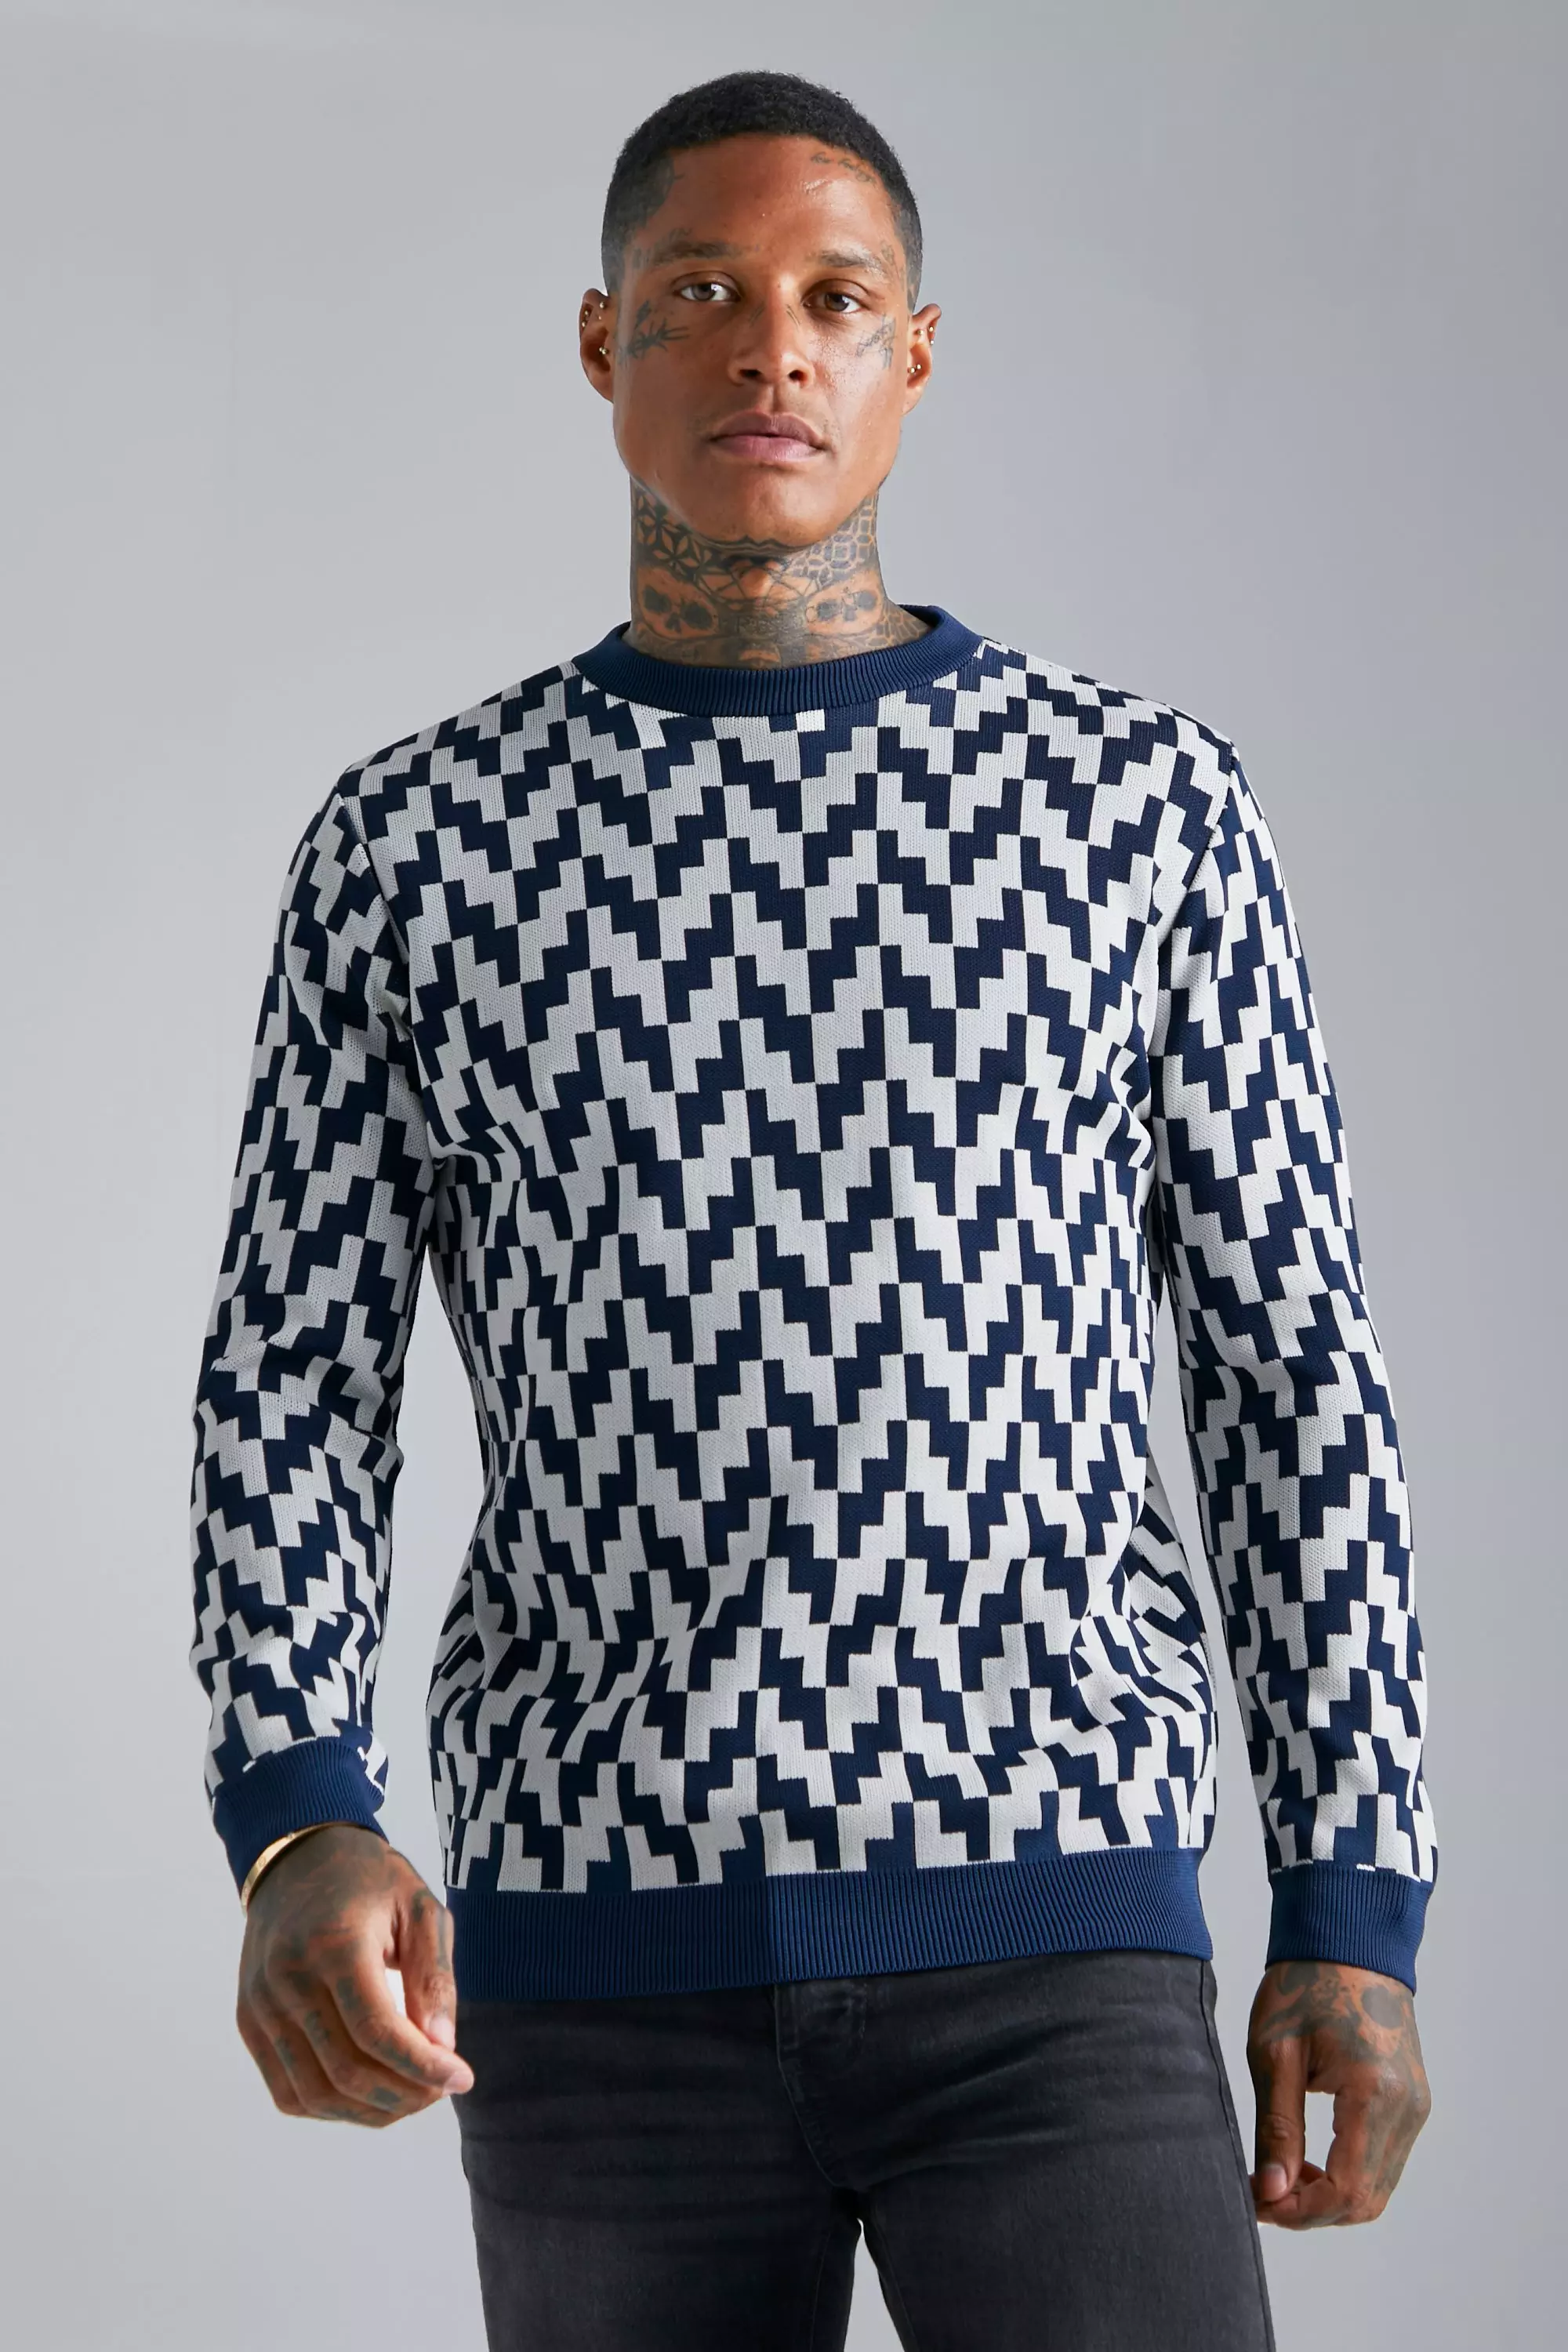 Navy Geo Square Smart Knitted Sweater